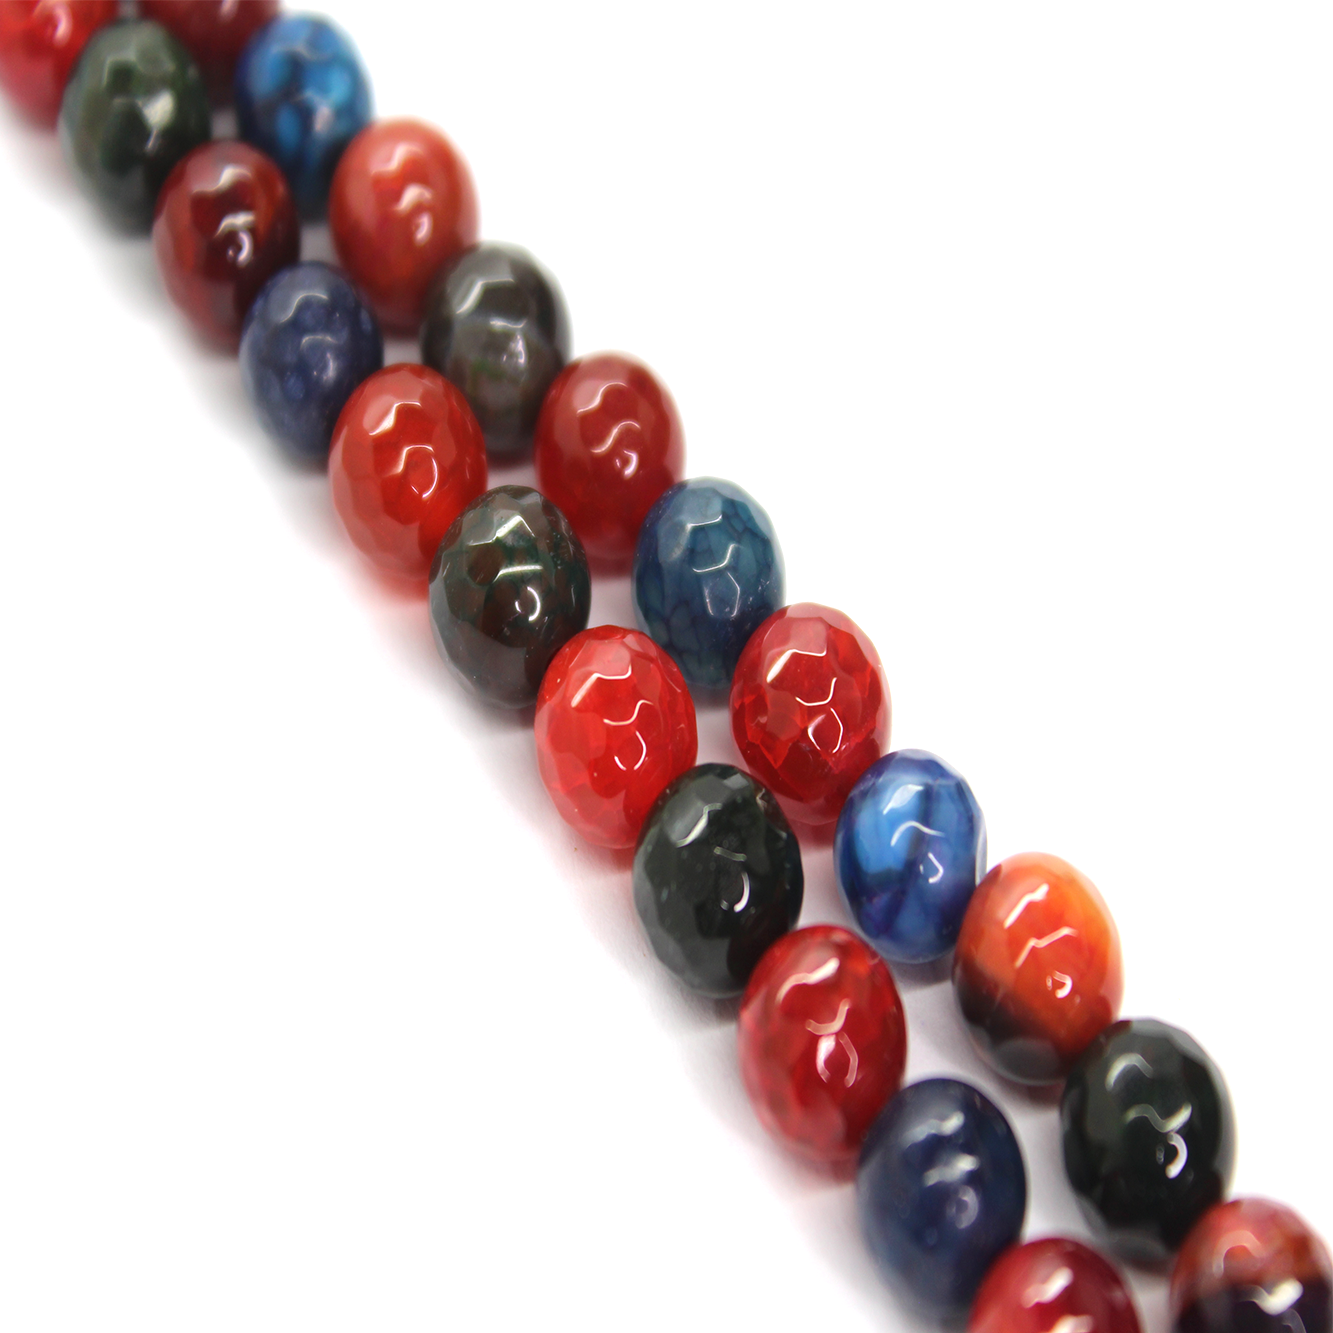 Agate Faceted - Colorful Fire Agate, Semi-Precious Stone, 8mm, 48 pcs per strand - Butterfly Beads